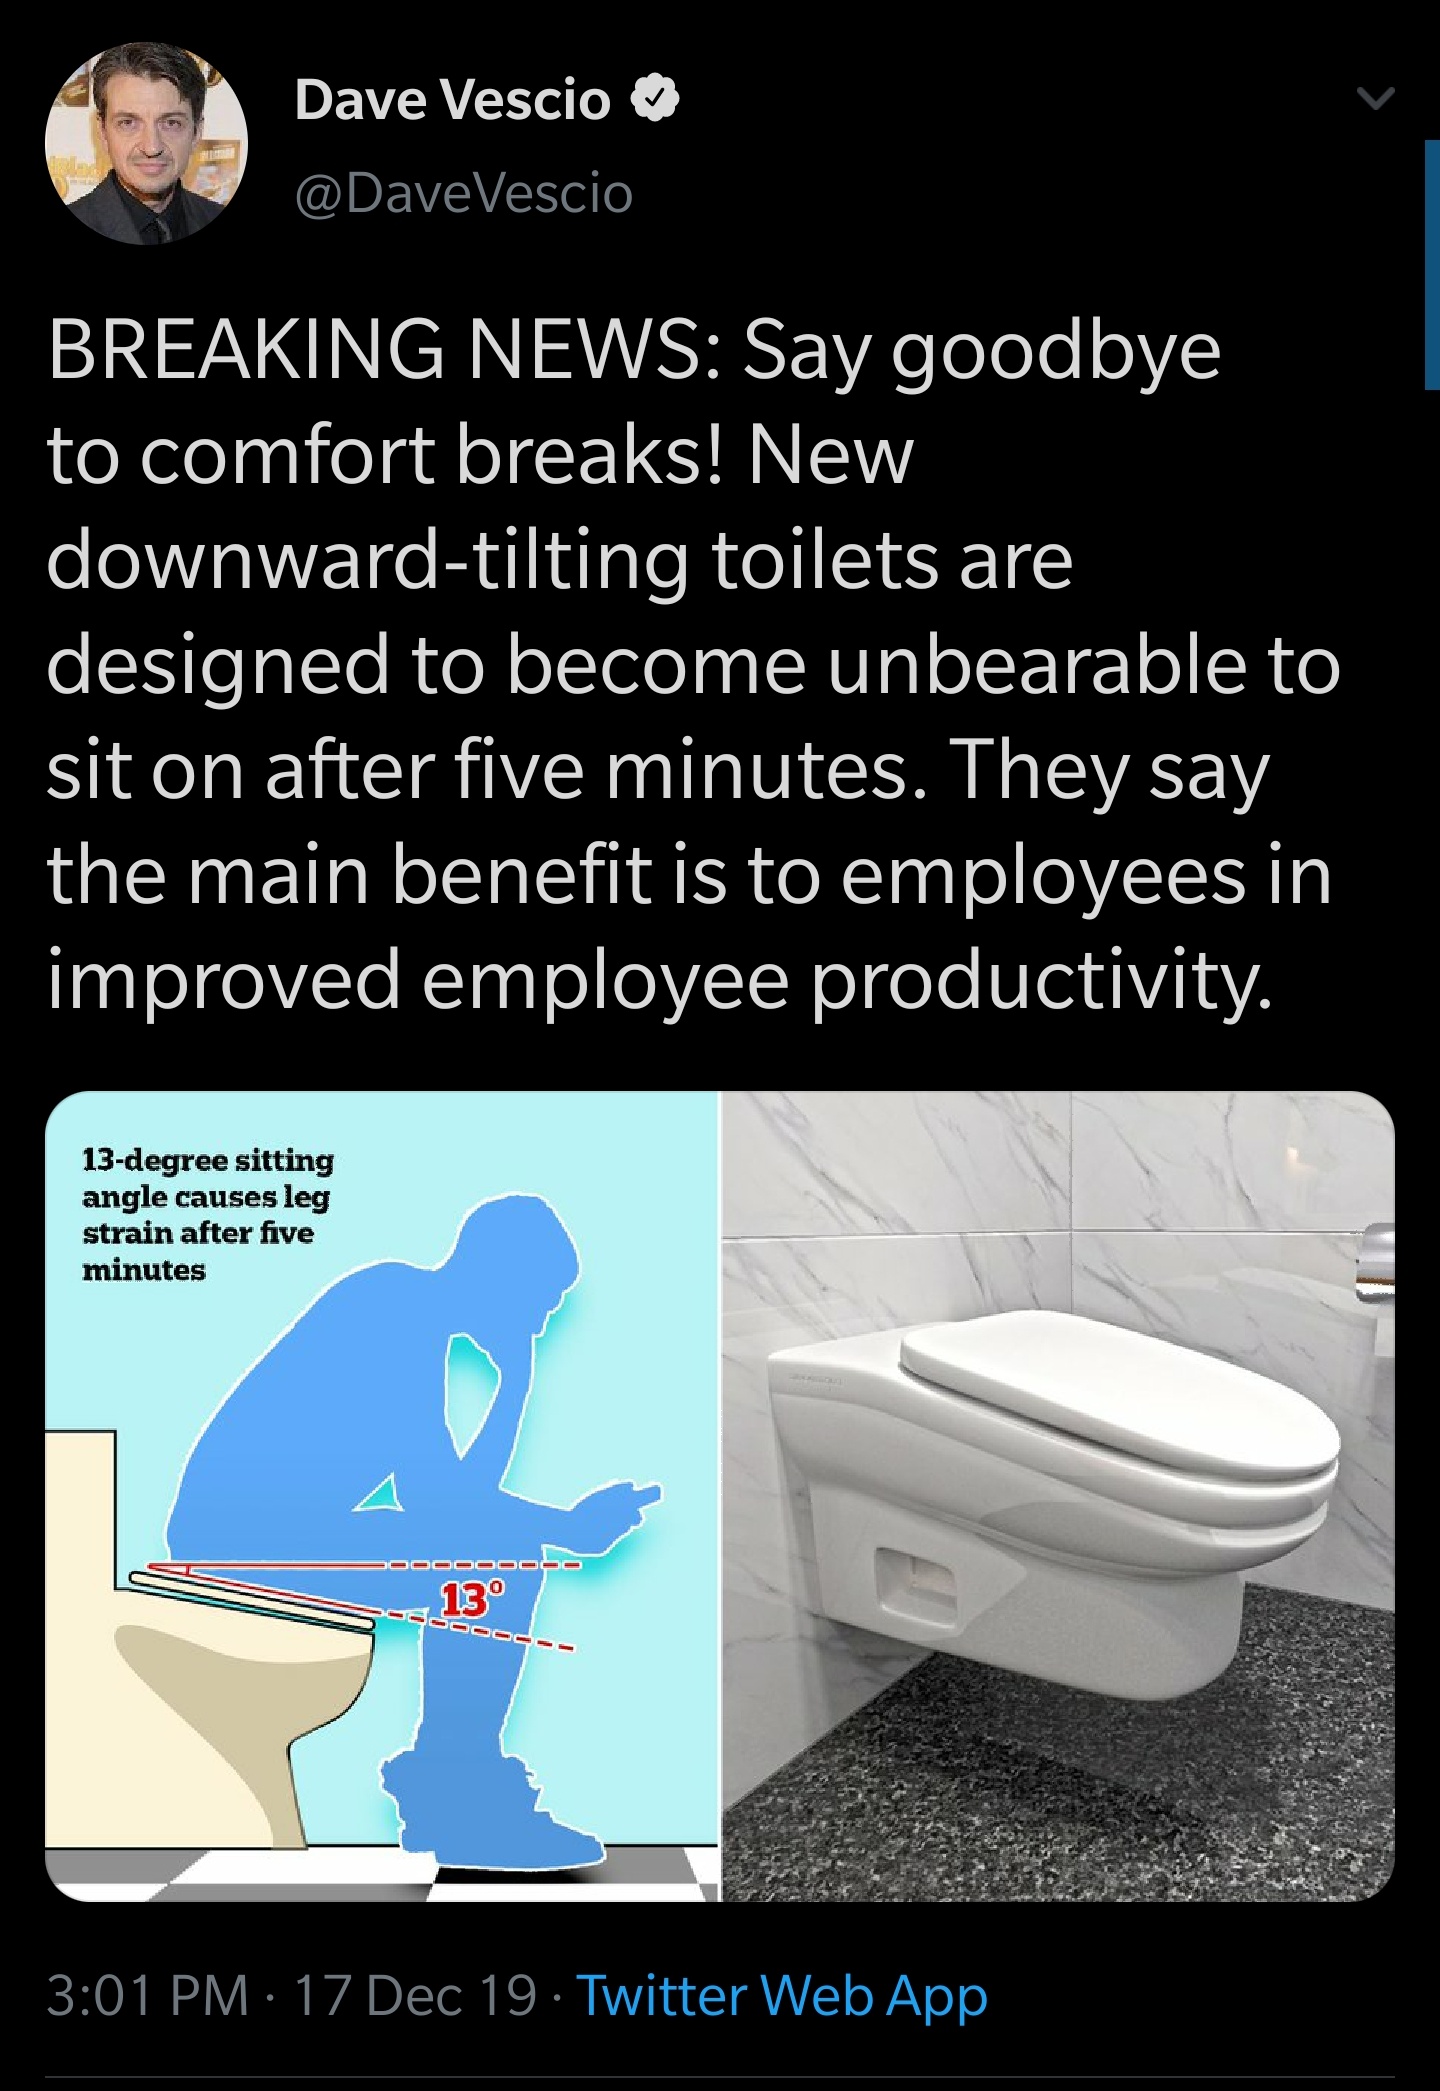 white twitter - Dave Vescio Vescio Breaking News Say goodbye to comfort breaks! New downwardtilting toilets are designed to become unbearable to sit on after five minutes. They say the main benefit is to employees in improved employee productivity. 13degr